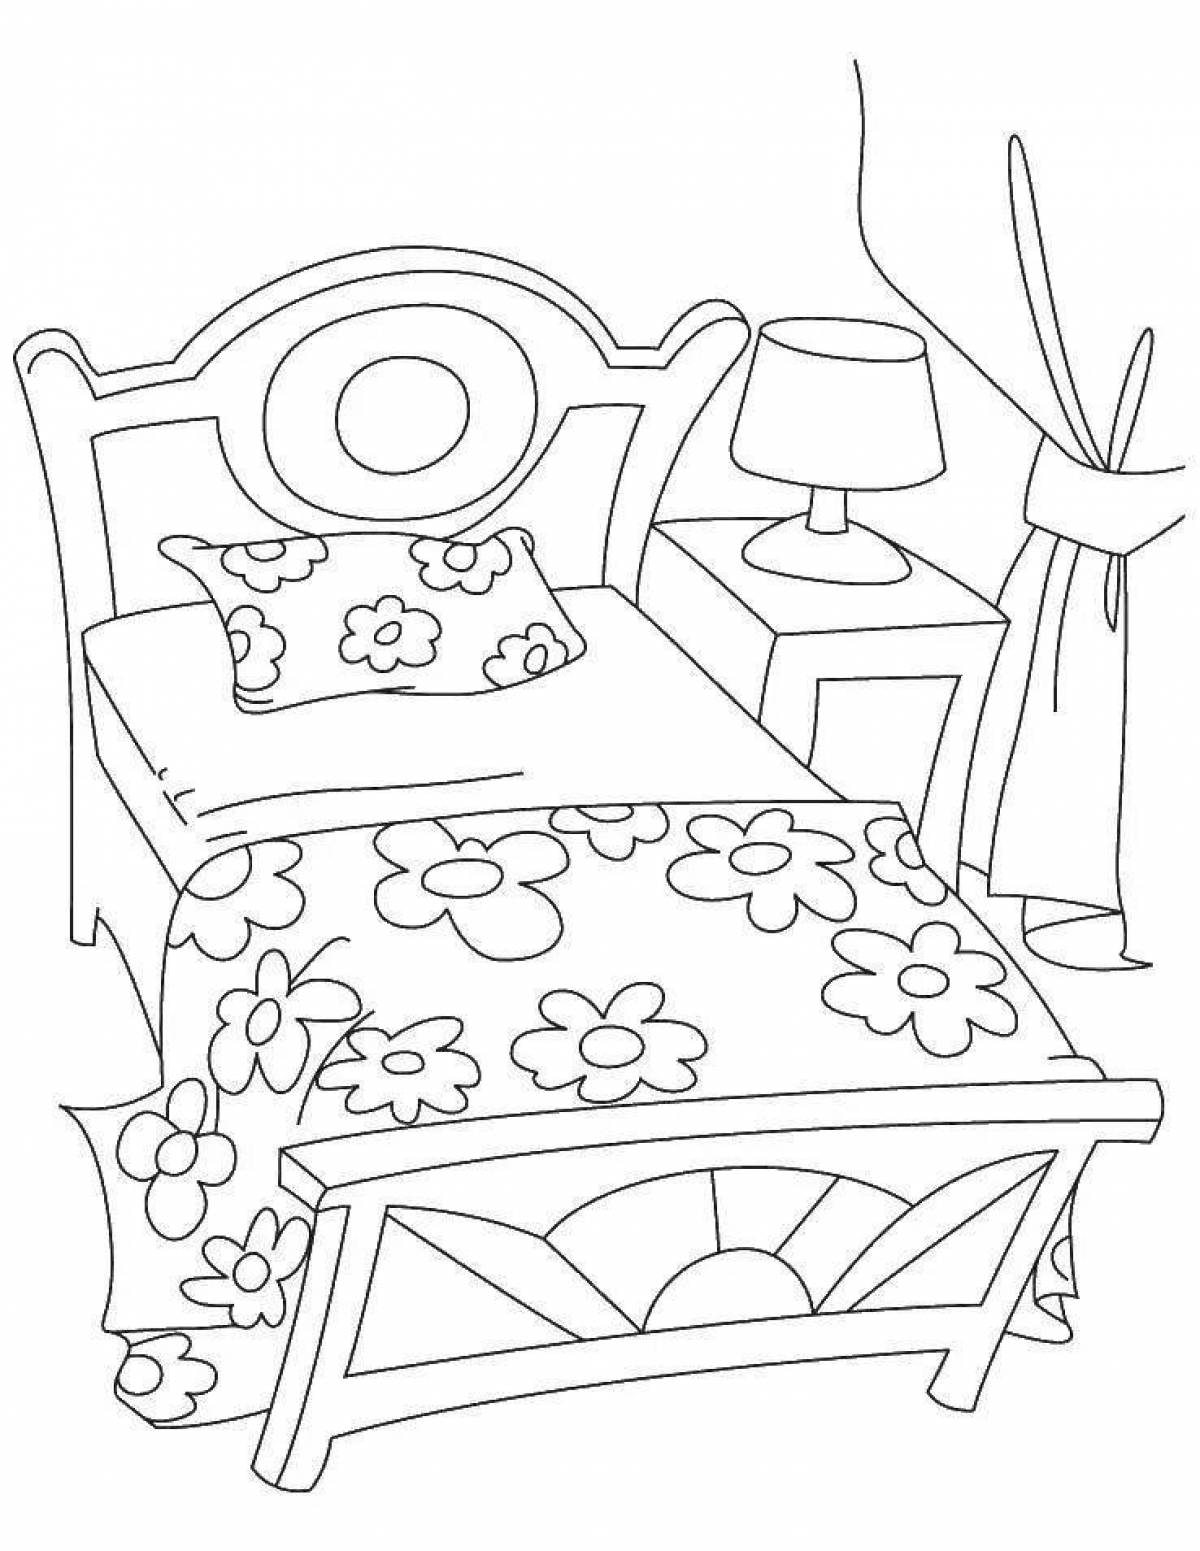 Children's bedroom color-explosion coloring page